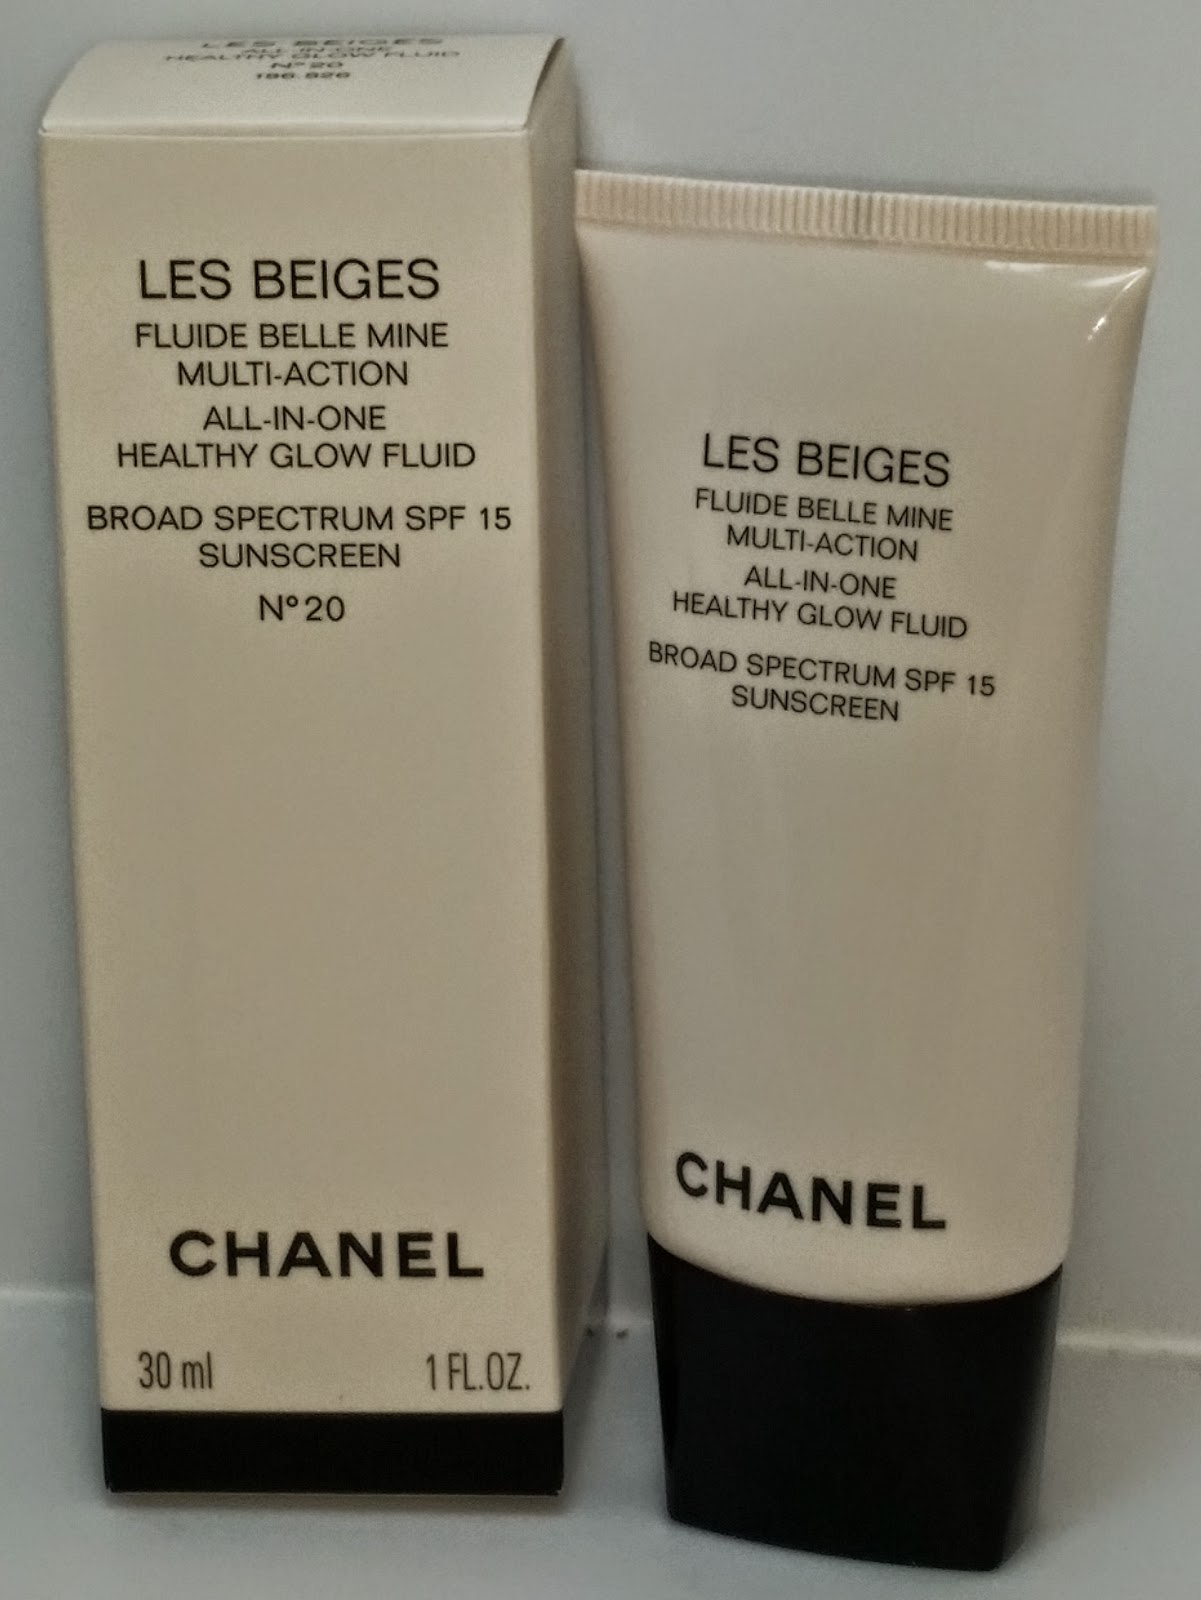 Jayded Dreaming Beauty Blog : N°20 CHANEL LES BEIGES MULTI-ACTION  ALL-IN-ONE HEALTHY GLOW FLUID - SWATCHES AND REVIEW